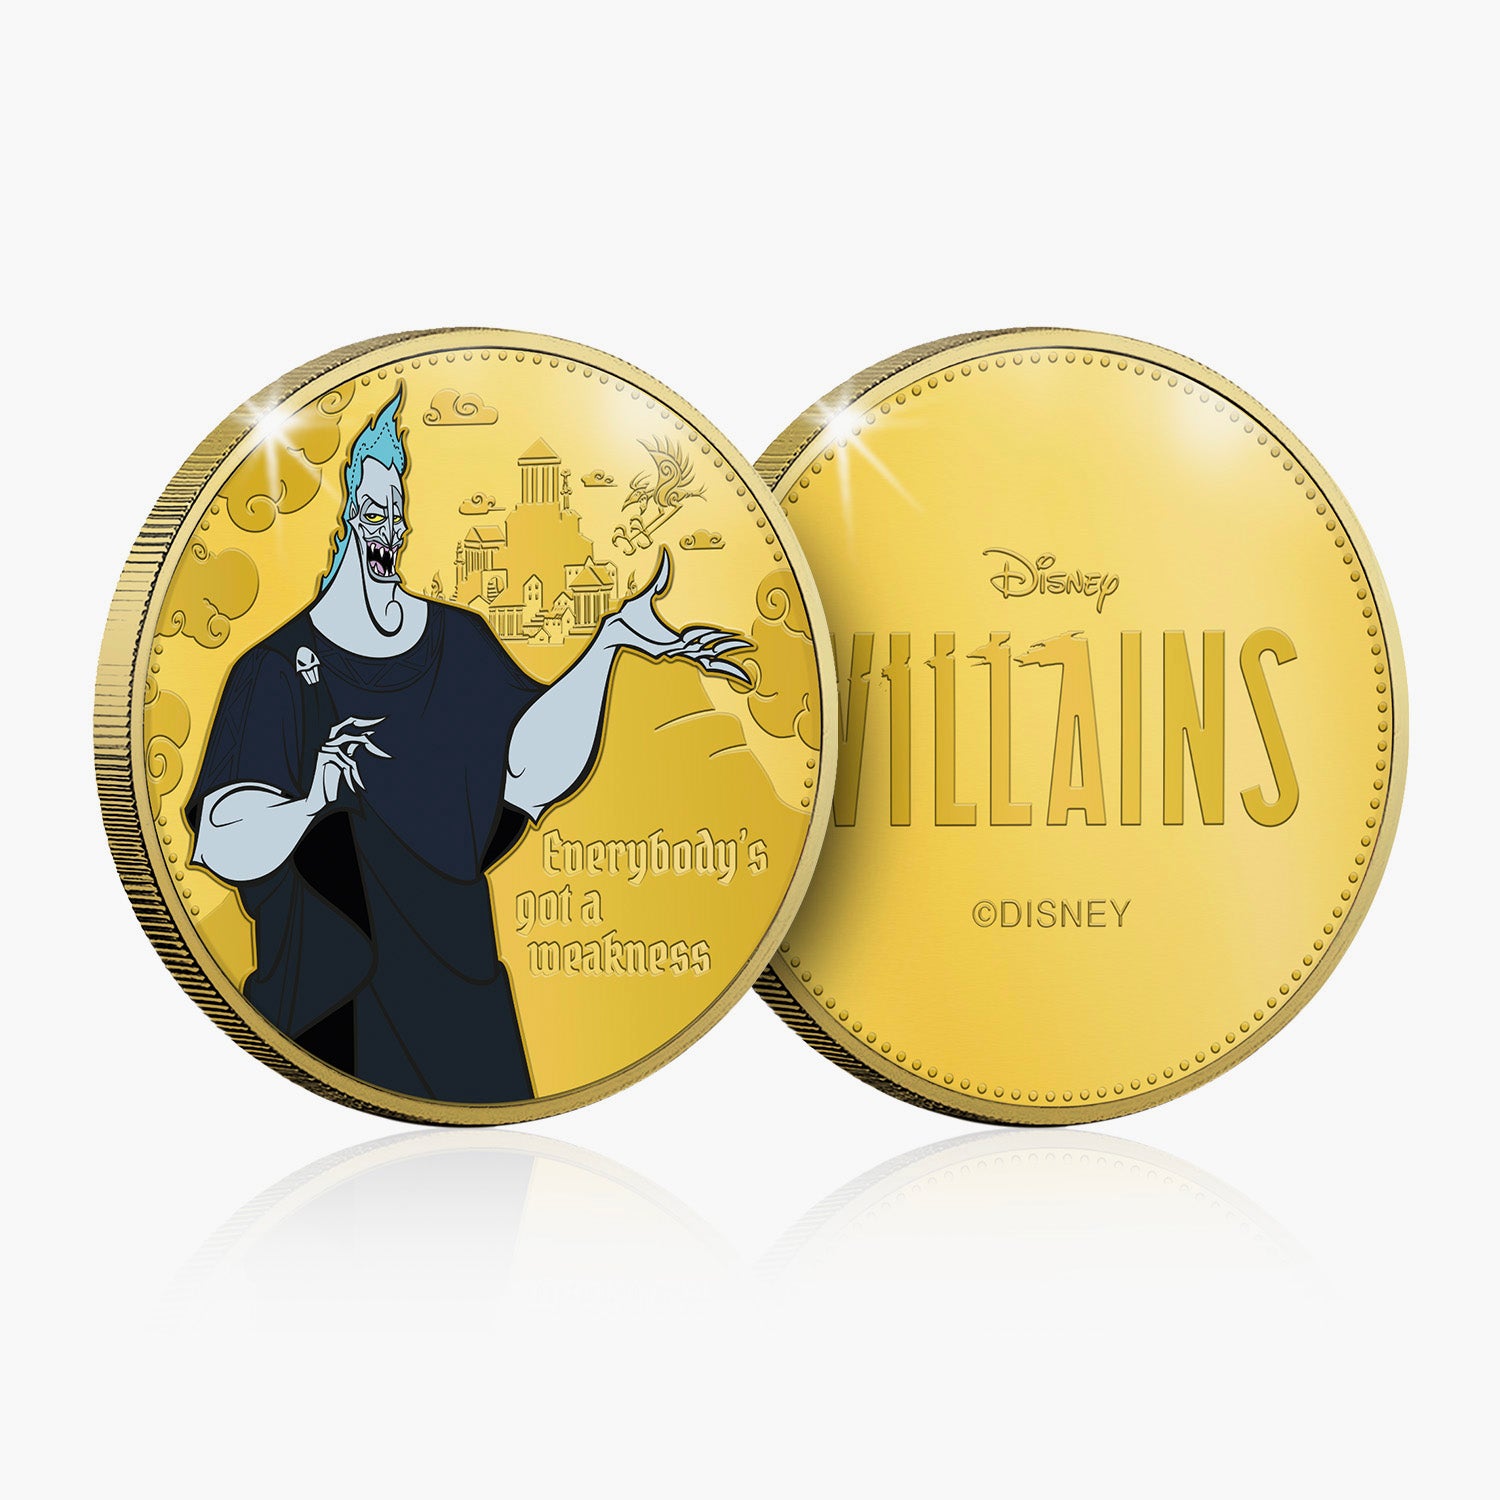 Hades Gold-Plated Commemorative